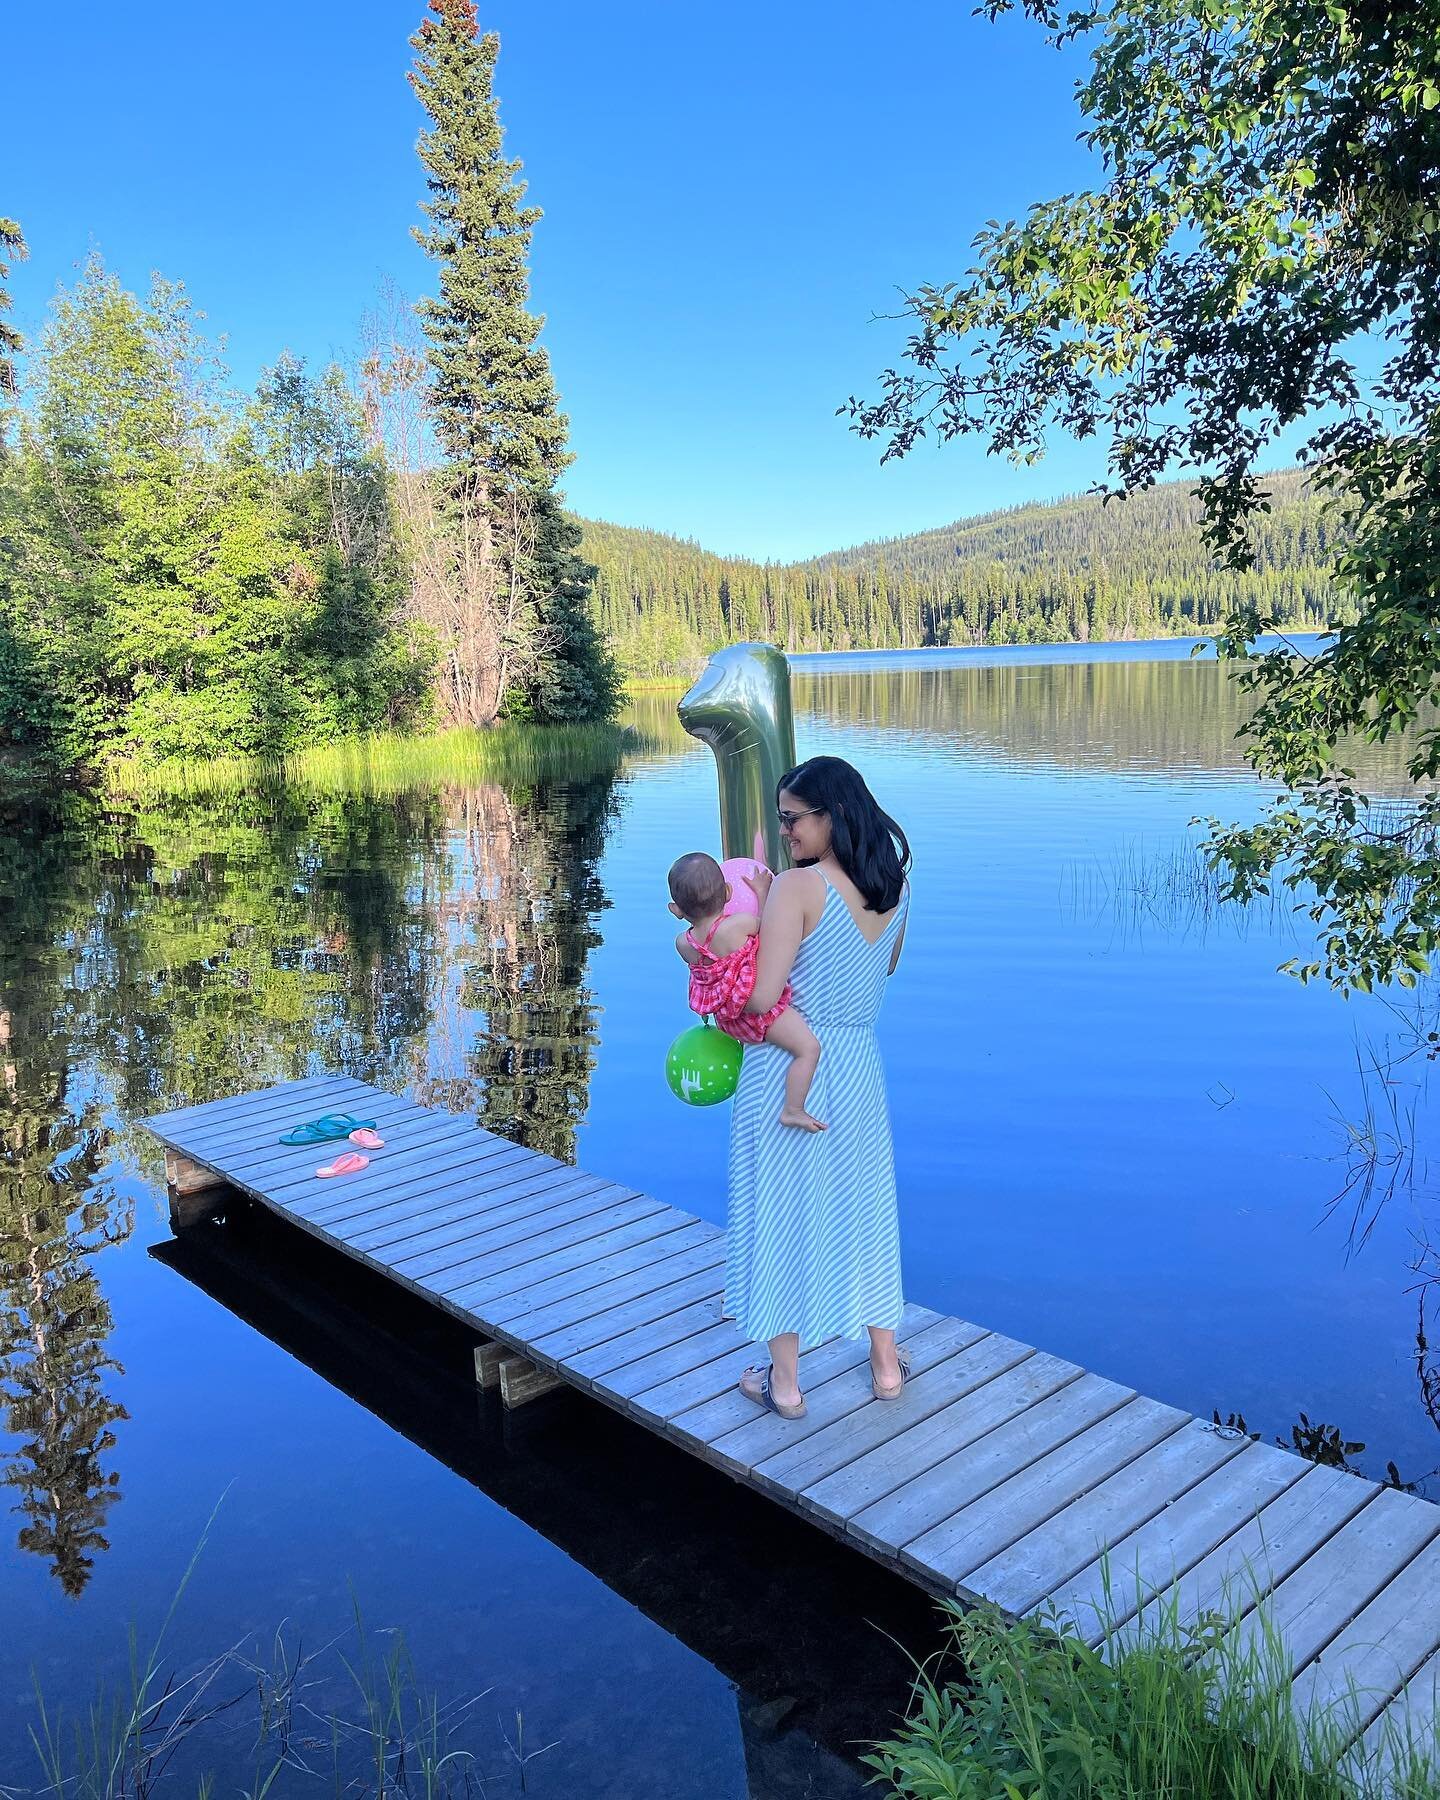 From a small business to a community for mindful parents. A new chapter is beginning. Monkinya will continue creating yoga tools for families (our cool Monkin kids are still available on Etsy). But our new focus will be on CONNECTION, community and s